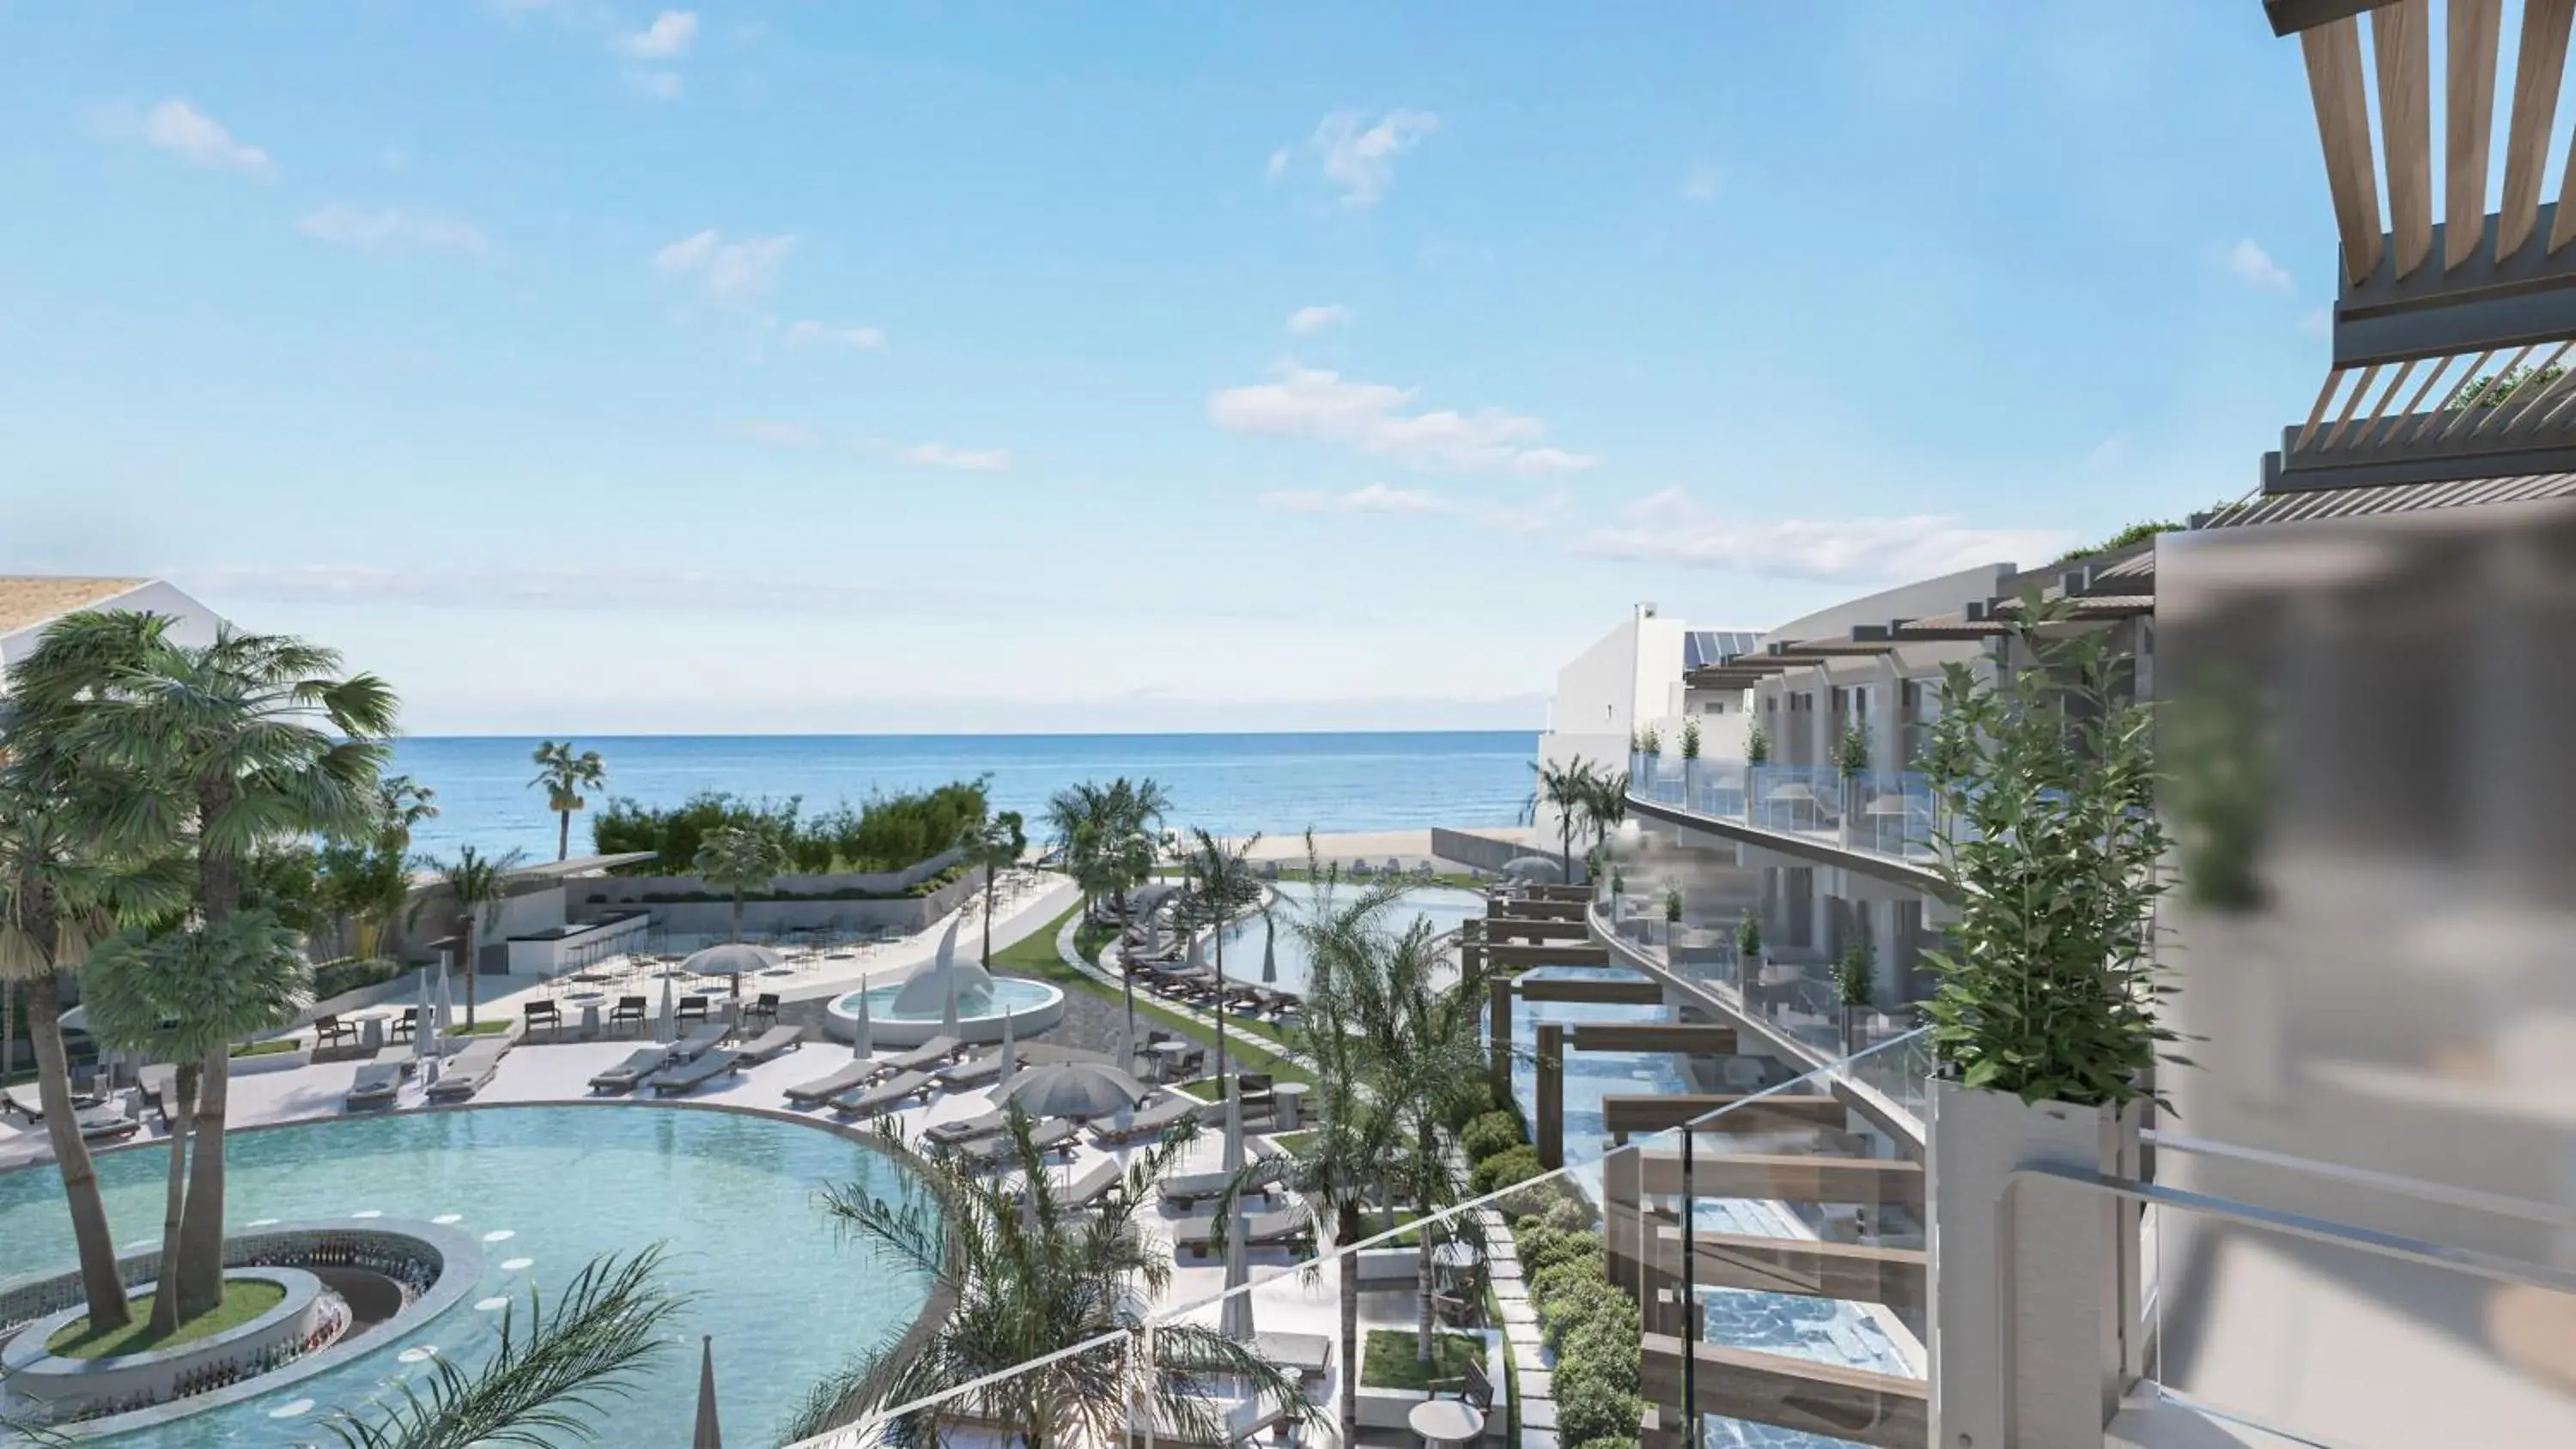 Property building, Pool View in Nautilux Rethymno by Mage Hotels